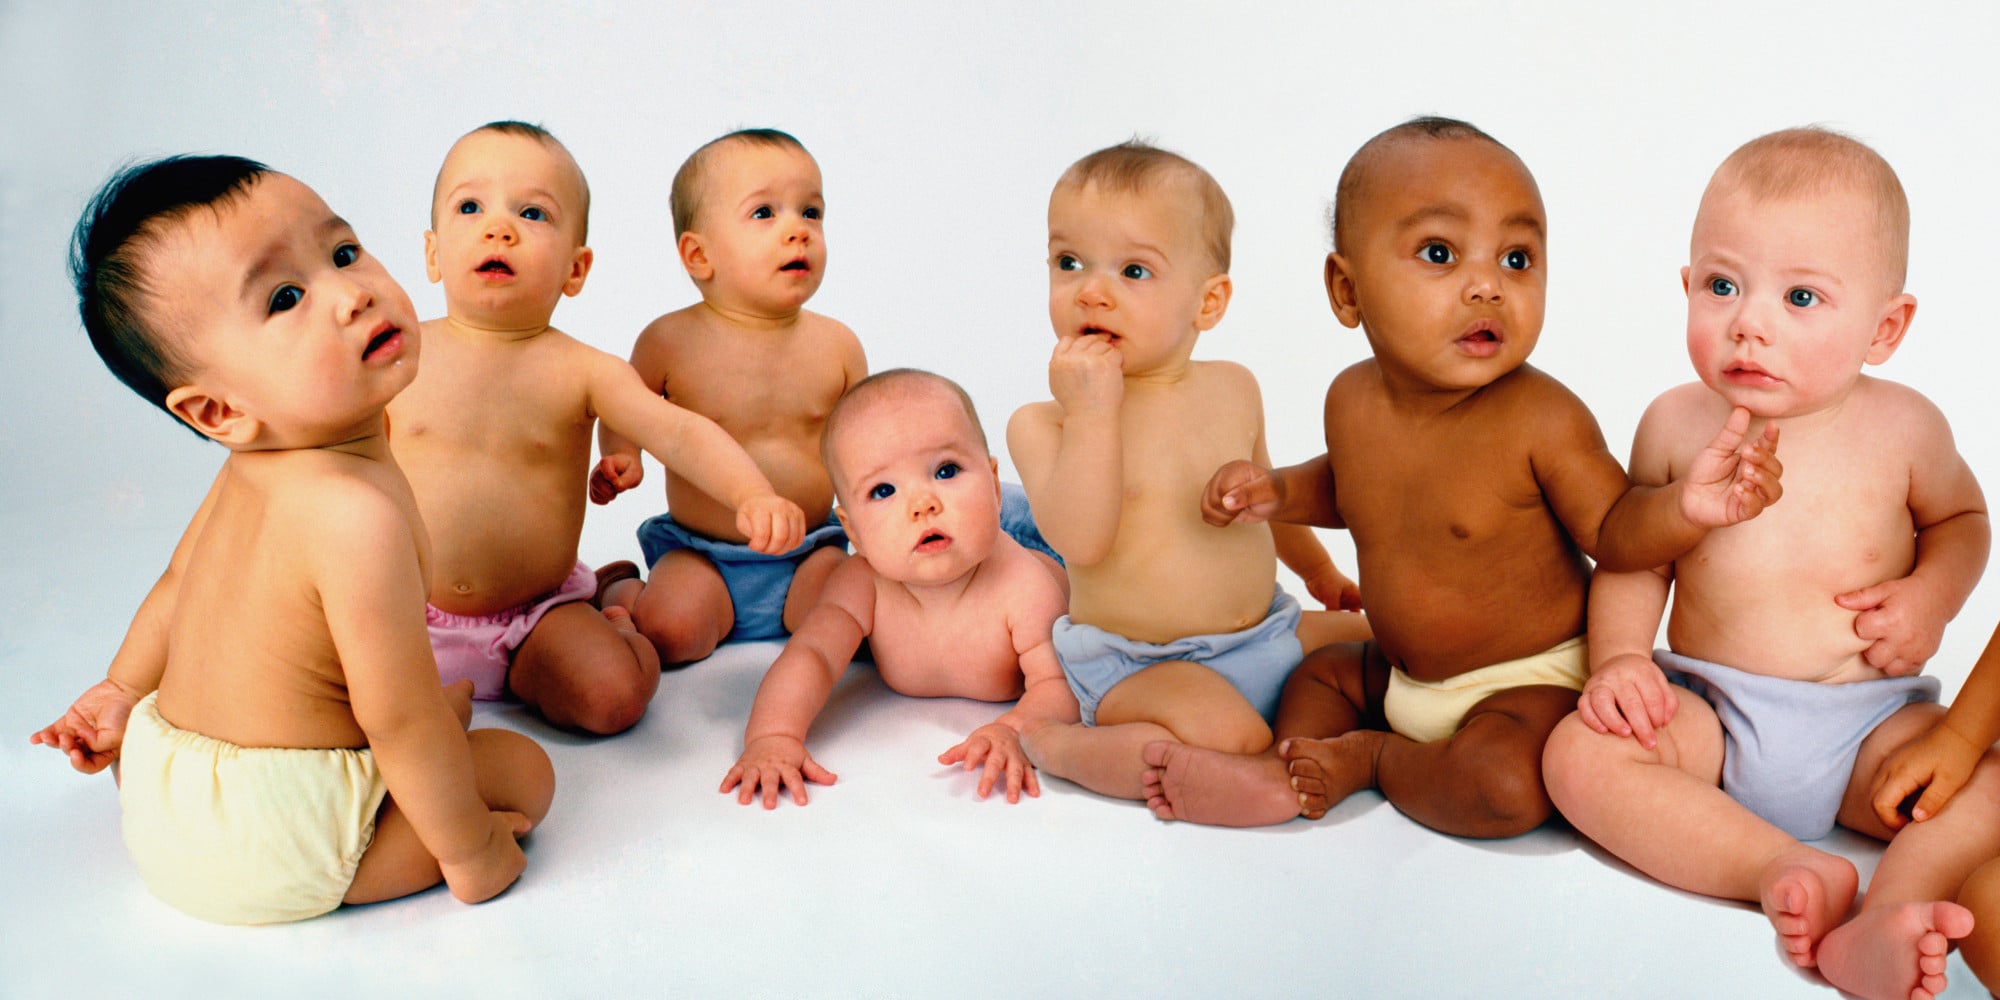 9. Mixed Race Babies with Blonde Hair: Cultural Perspectives - wide 4